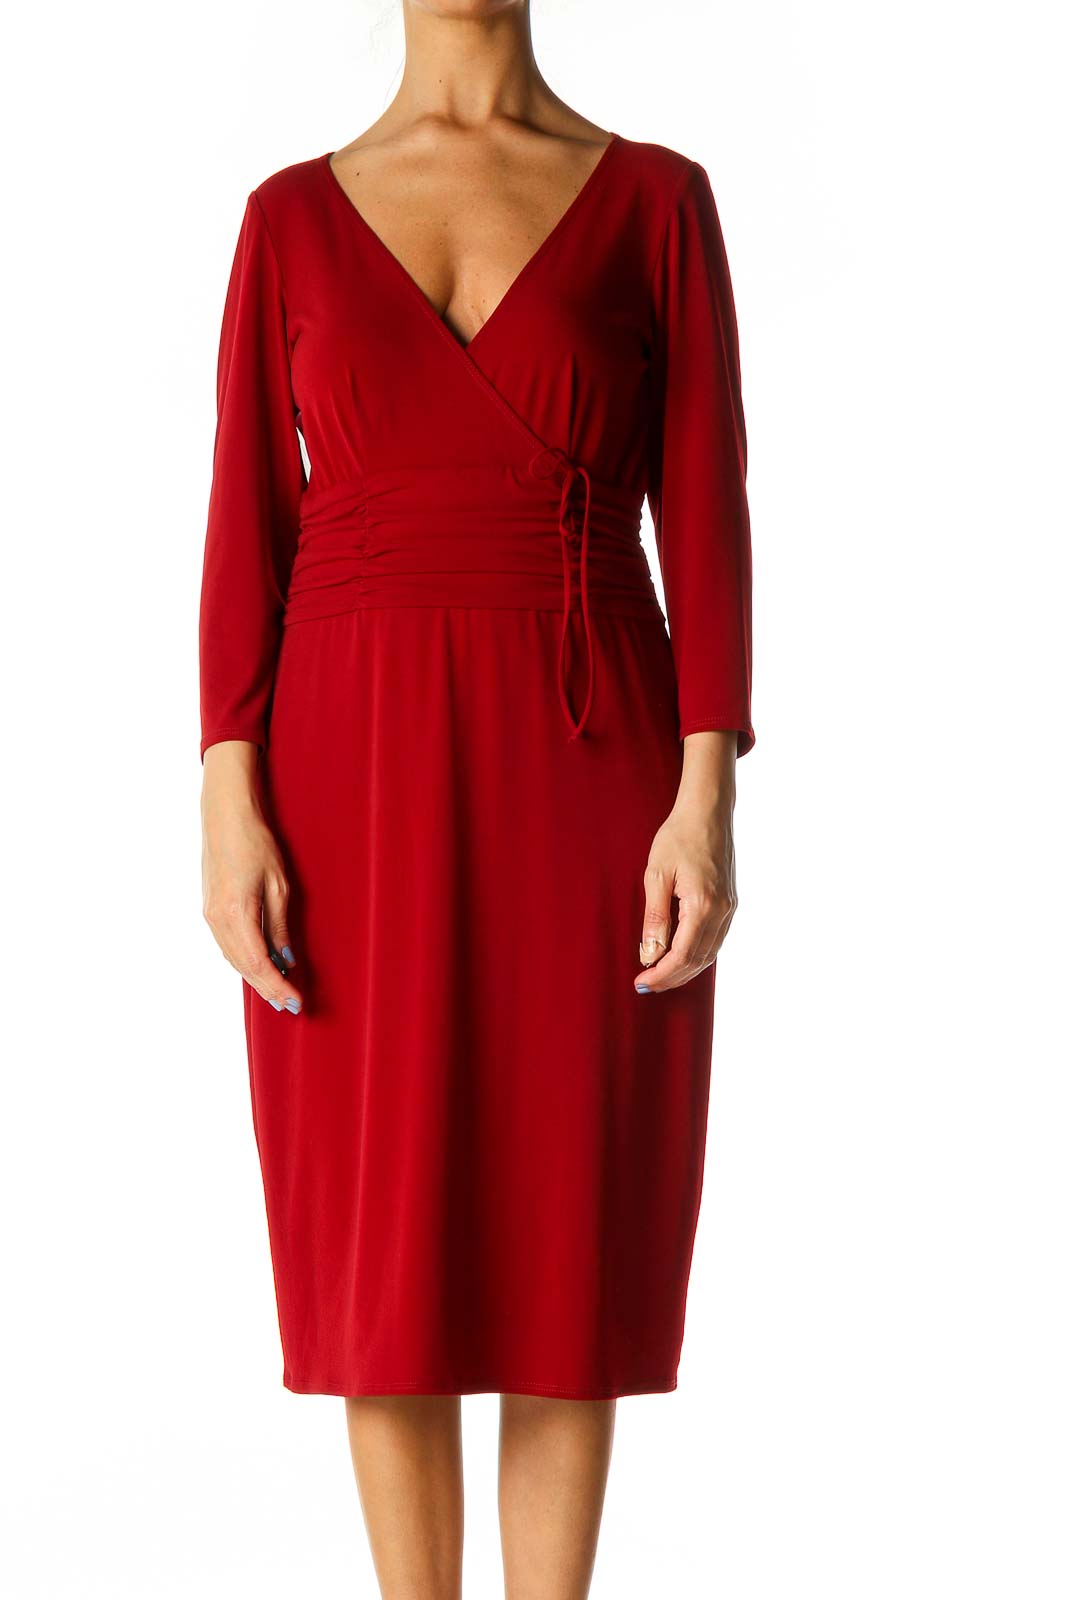 Red Solid Retro Shift Dress Front